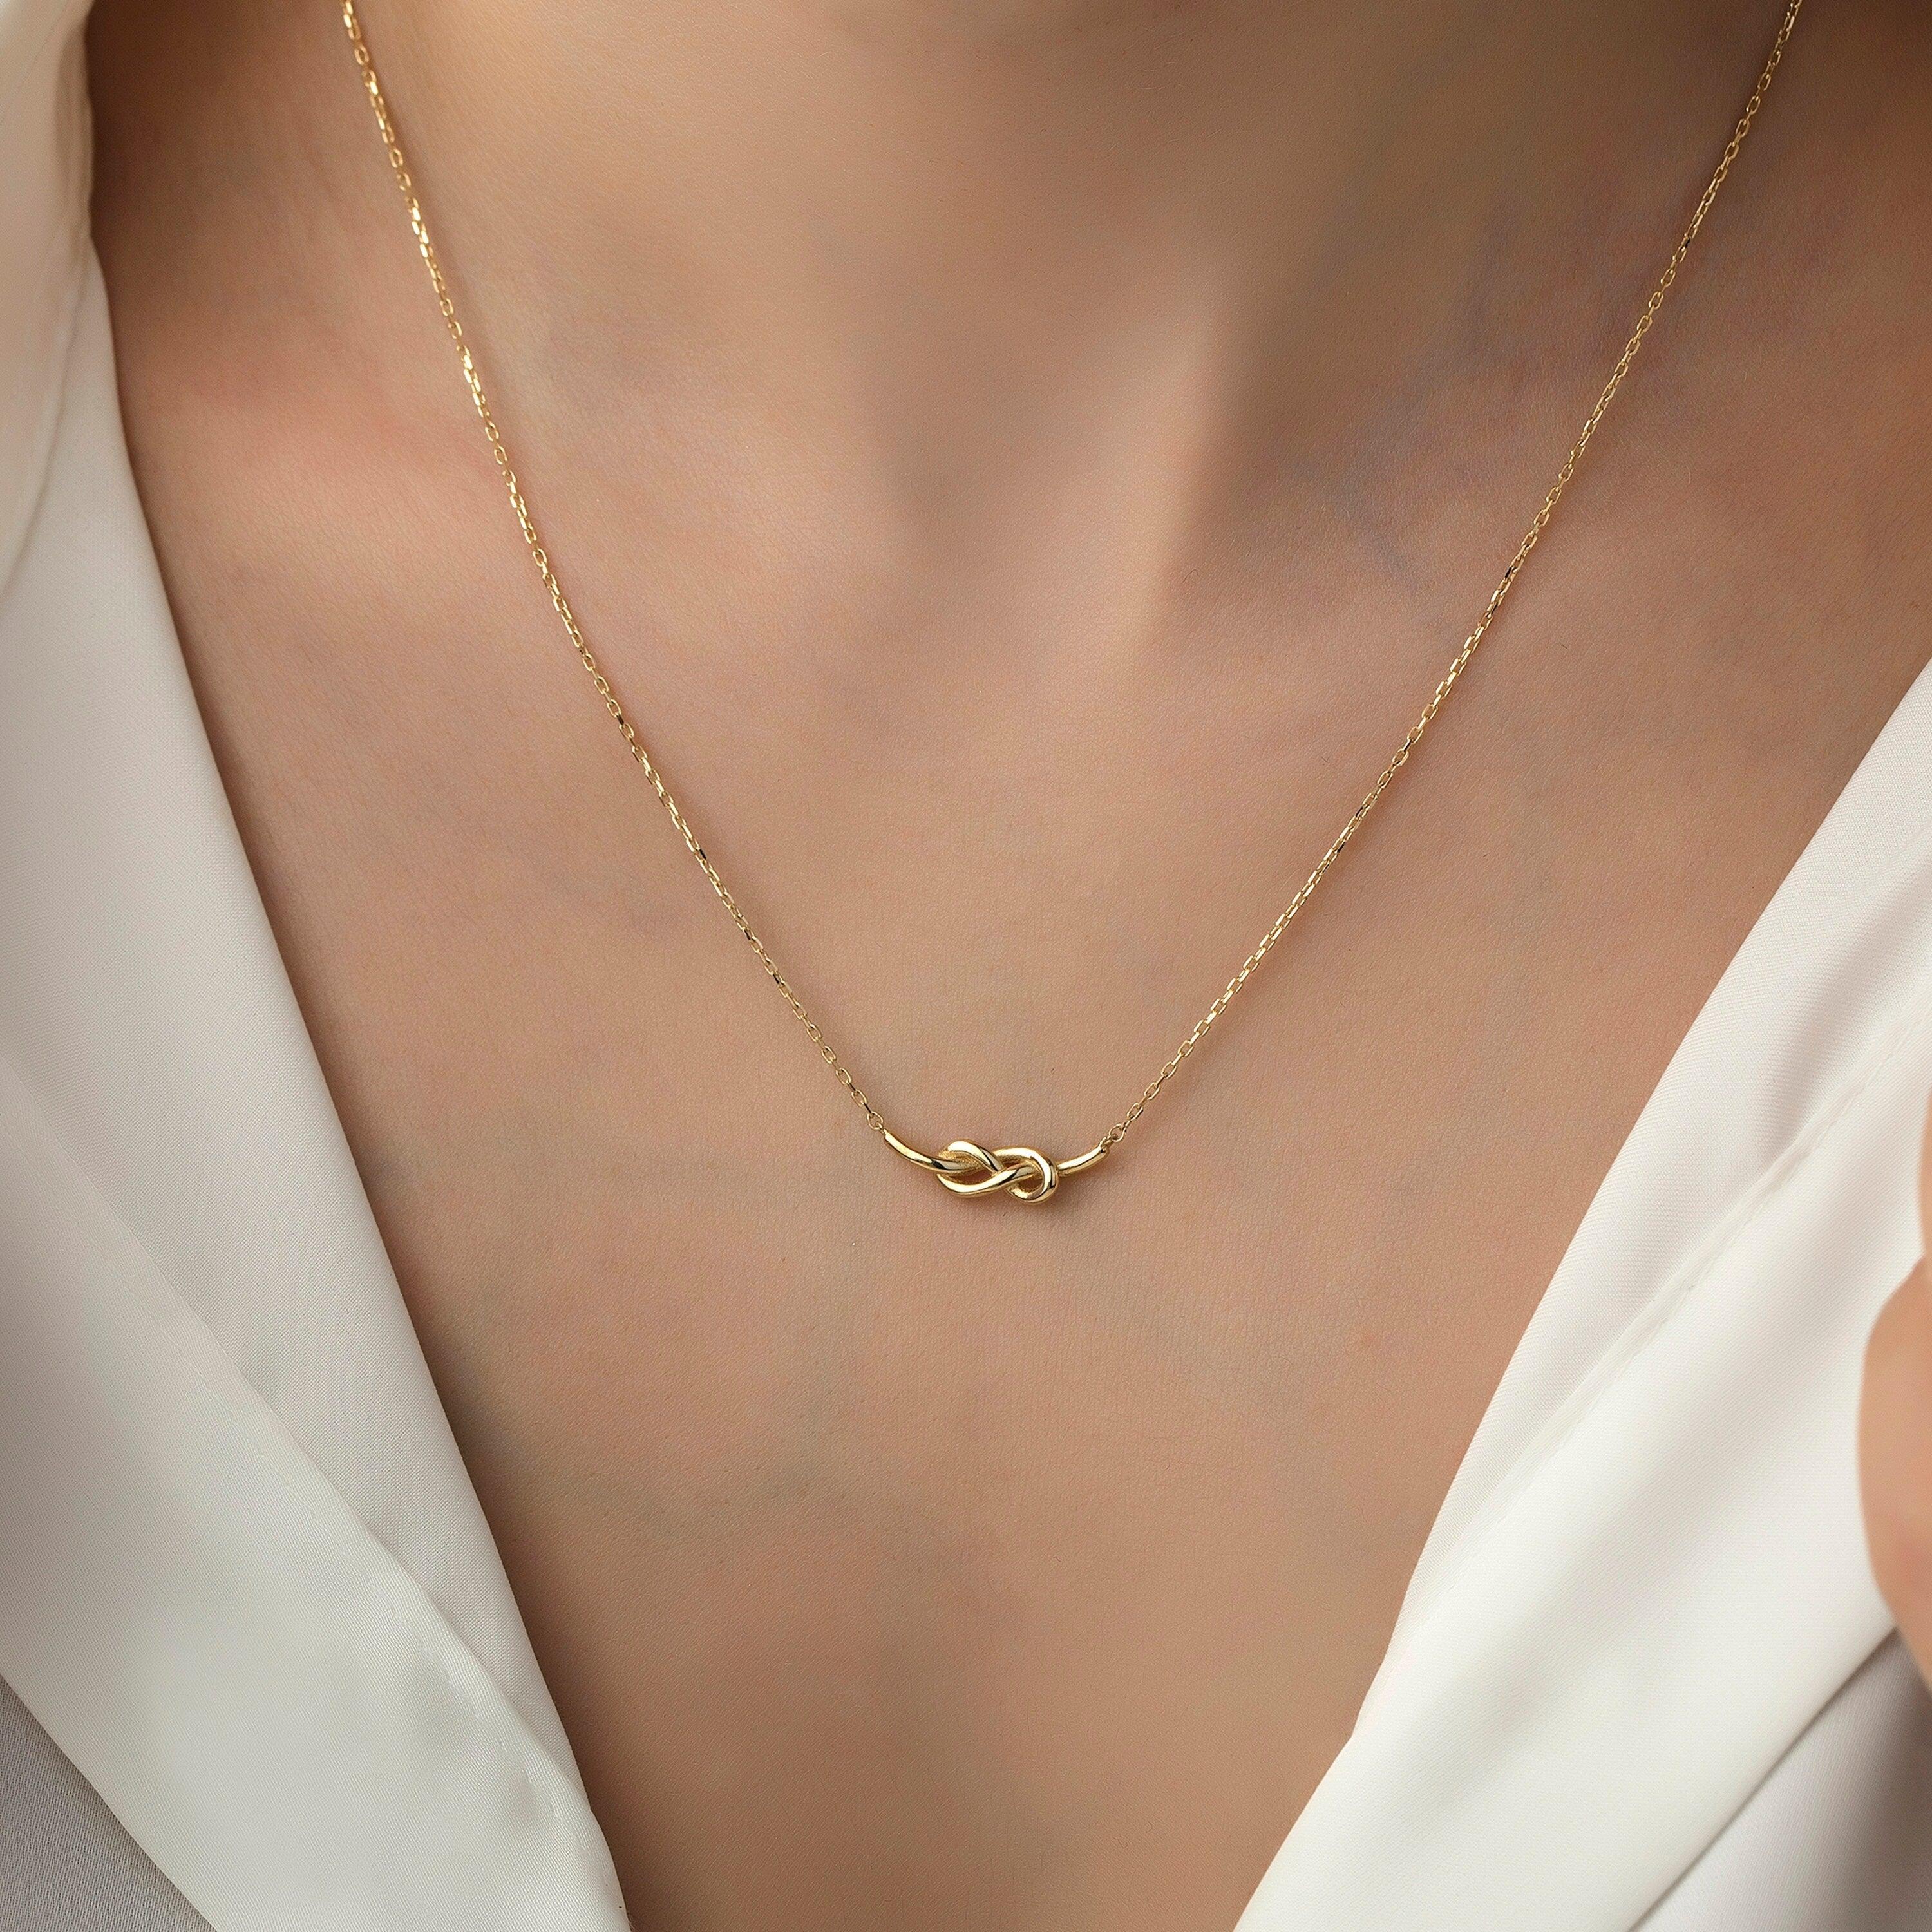 14K Gold Heracles Necklace Hems Jewellery 